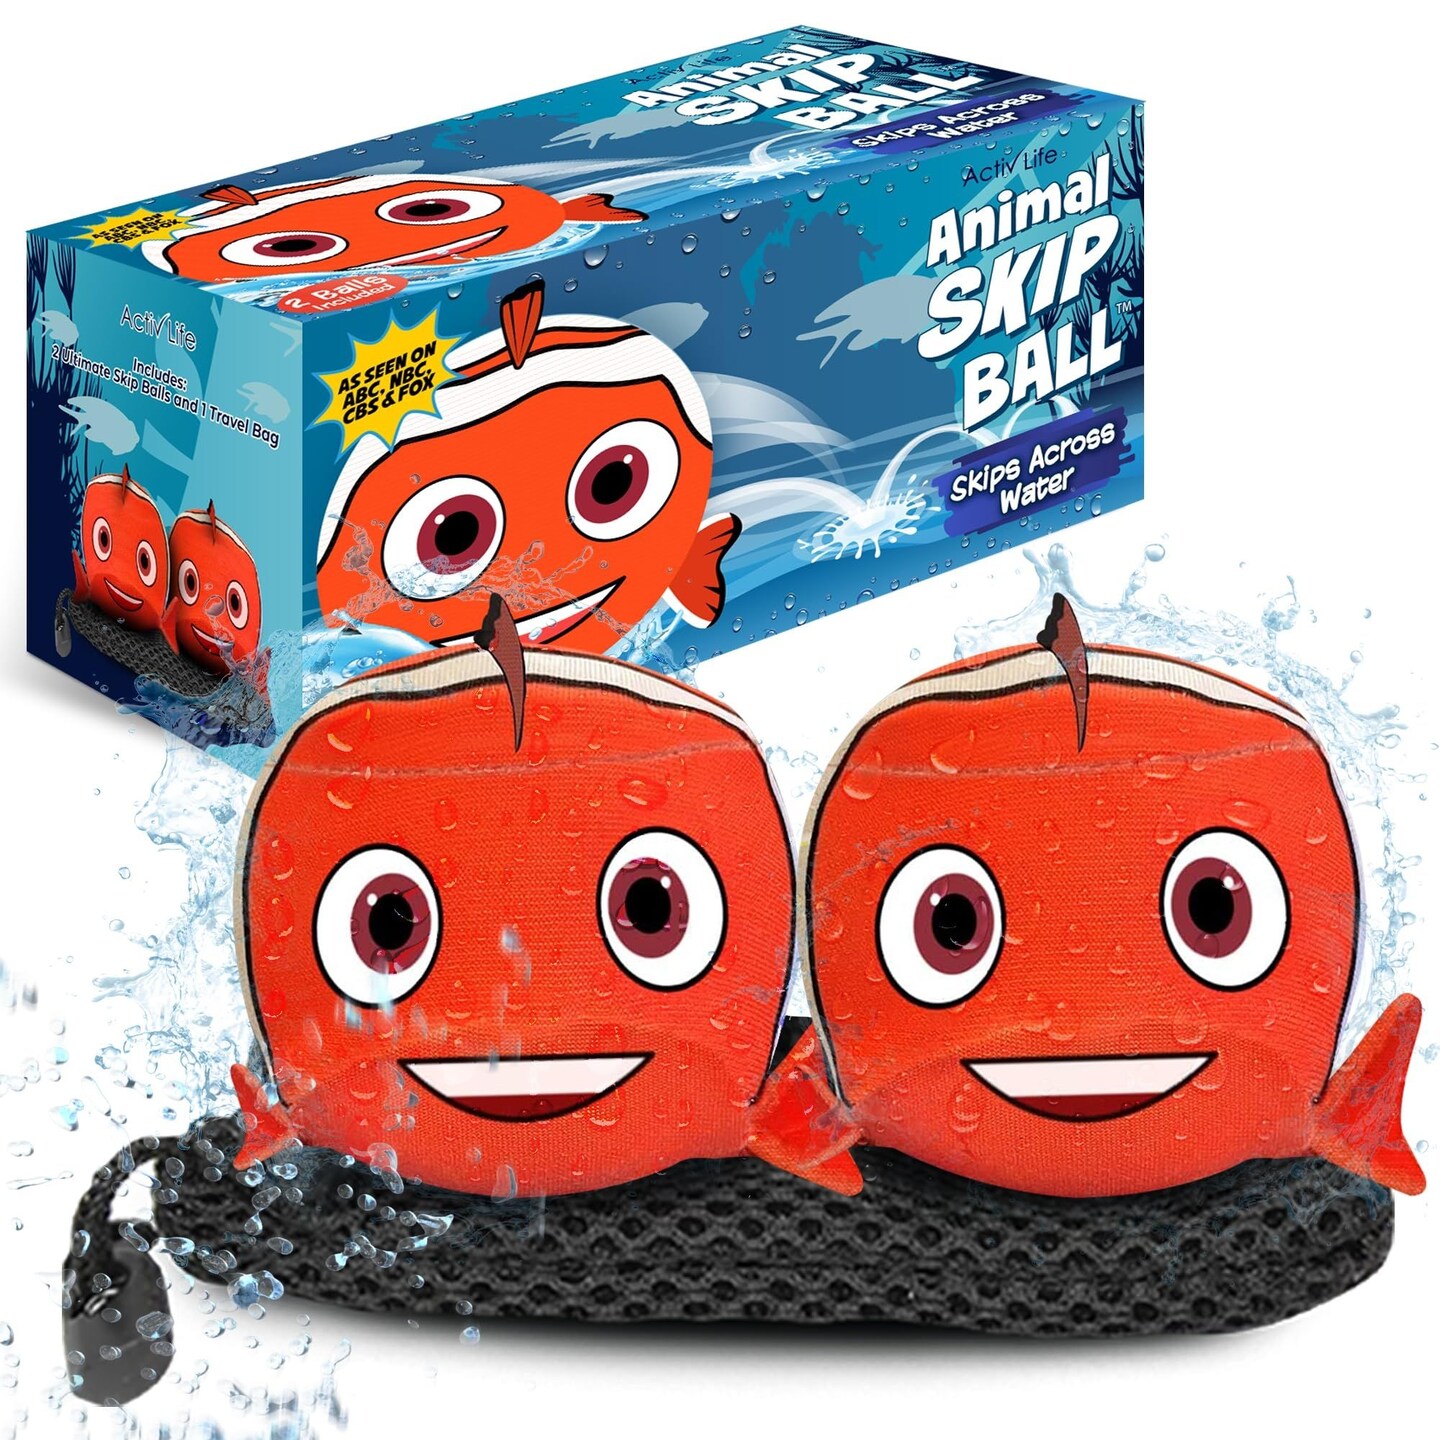 Easter Gifts for Kids [Water Skip Balls] Beach Games for Adults and Family Basket Stuffers Boys Girls Ages 7 8-10 11 12 Year Old Teen Gifts Swimming Pool Swim Toys Fun Sand Mom Dad Birthday Presents